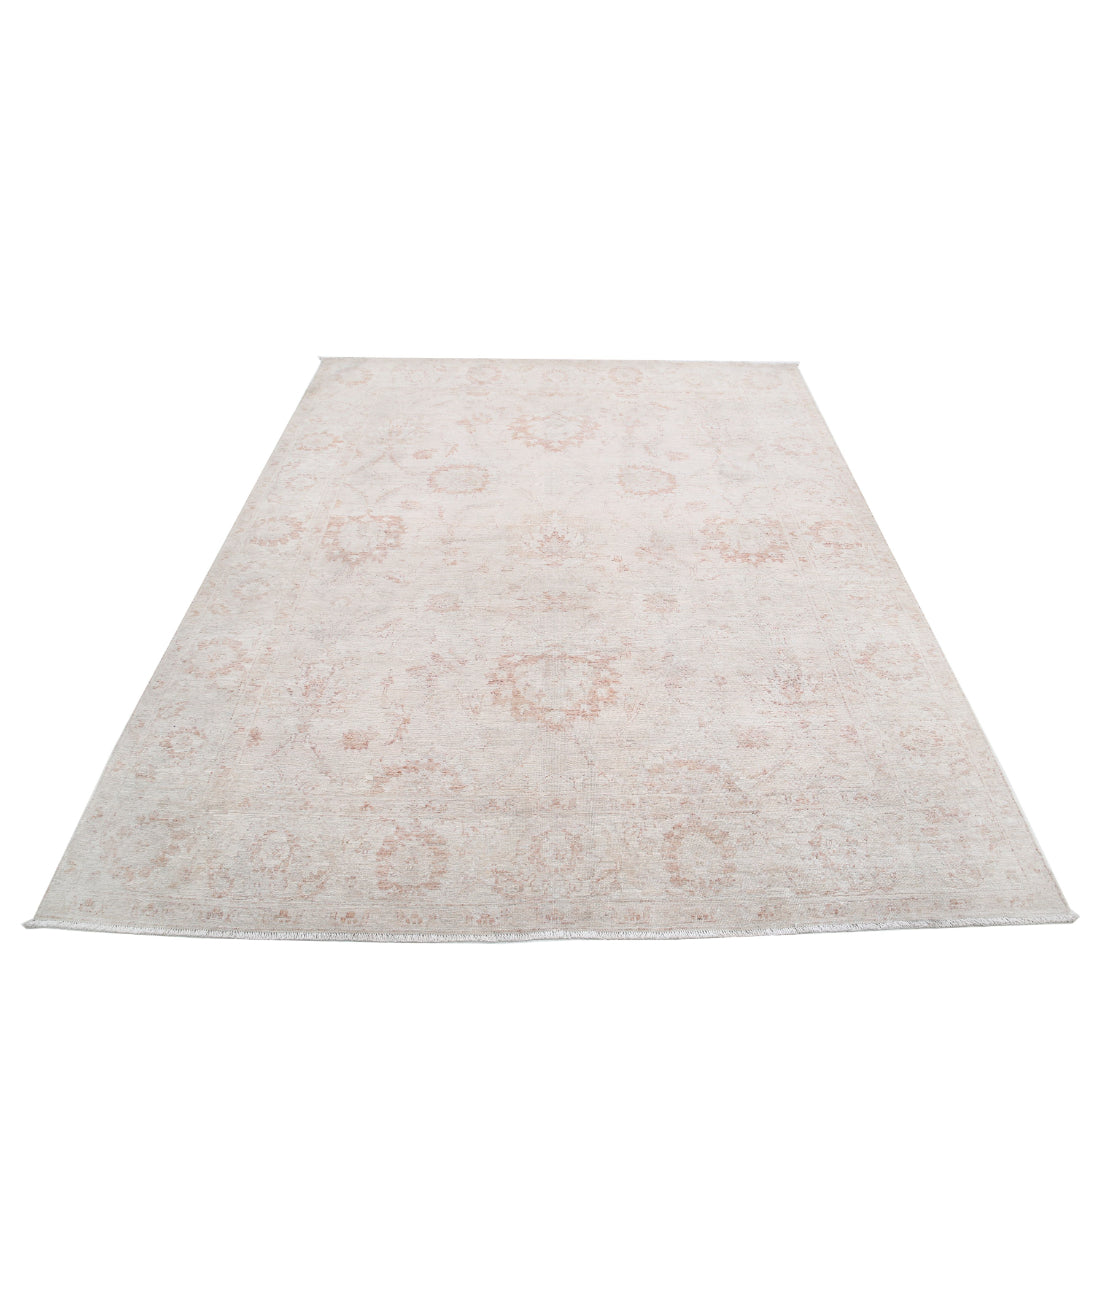 Hand Knotted Serenity Wool Rug - 6'4'' x 7'11'' 6'4'' x 7'11'' (190 X 238) / Ivory / Ivory